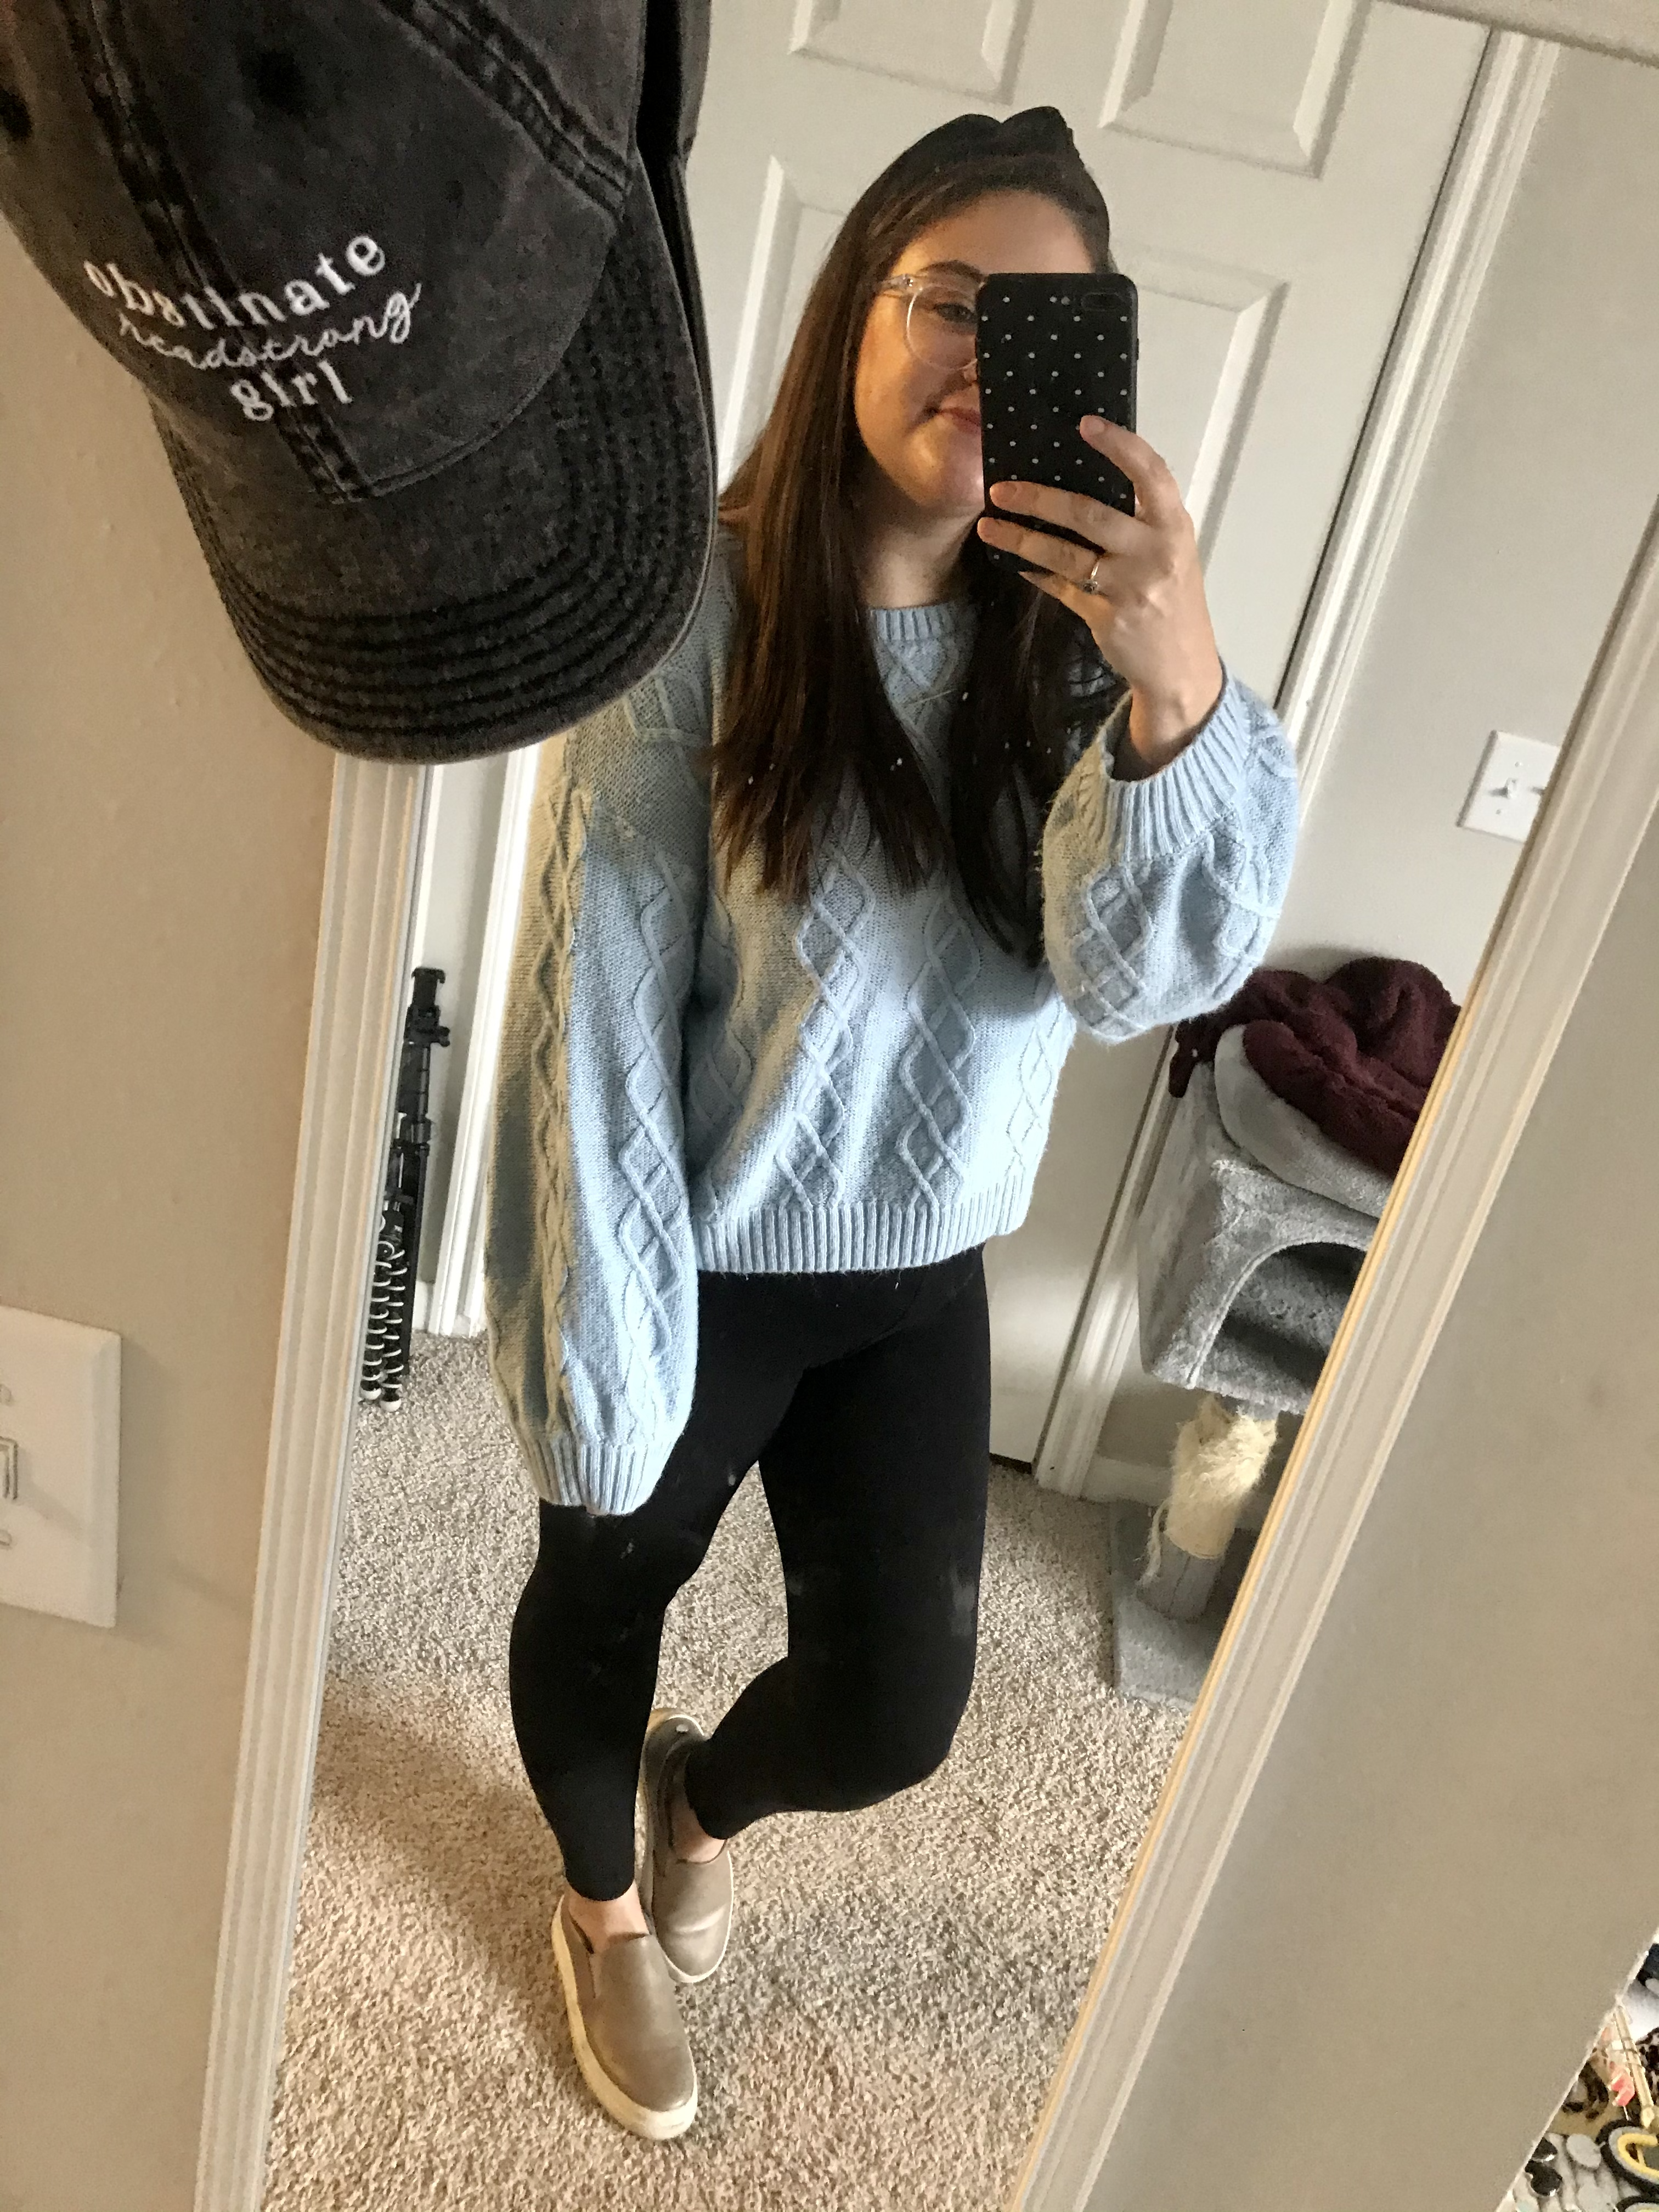 Girl in blue sweater and black leggings with grey slip on sneakers and black knot headband